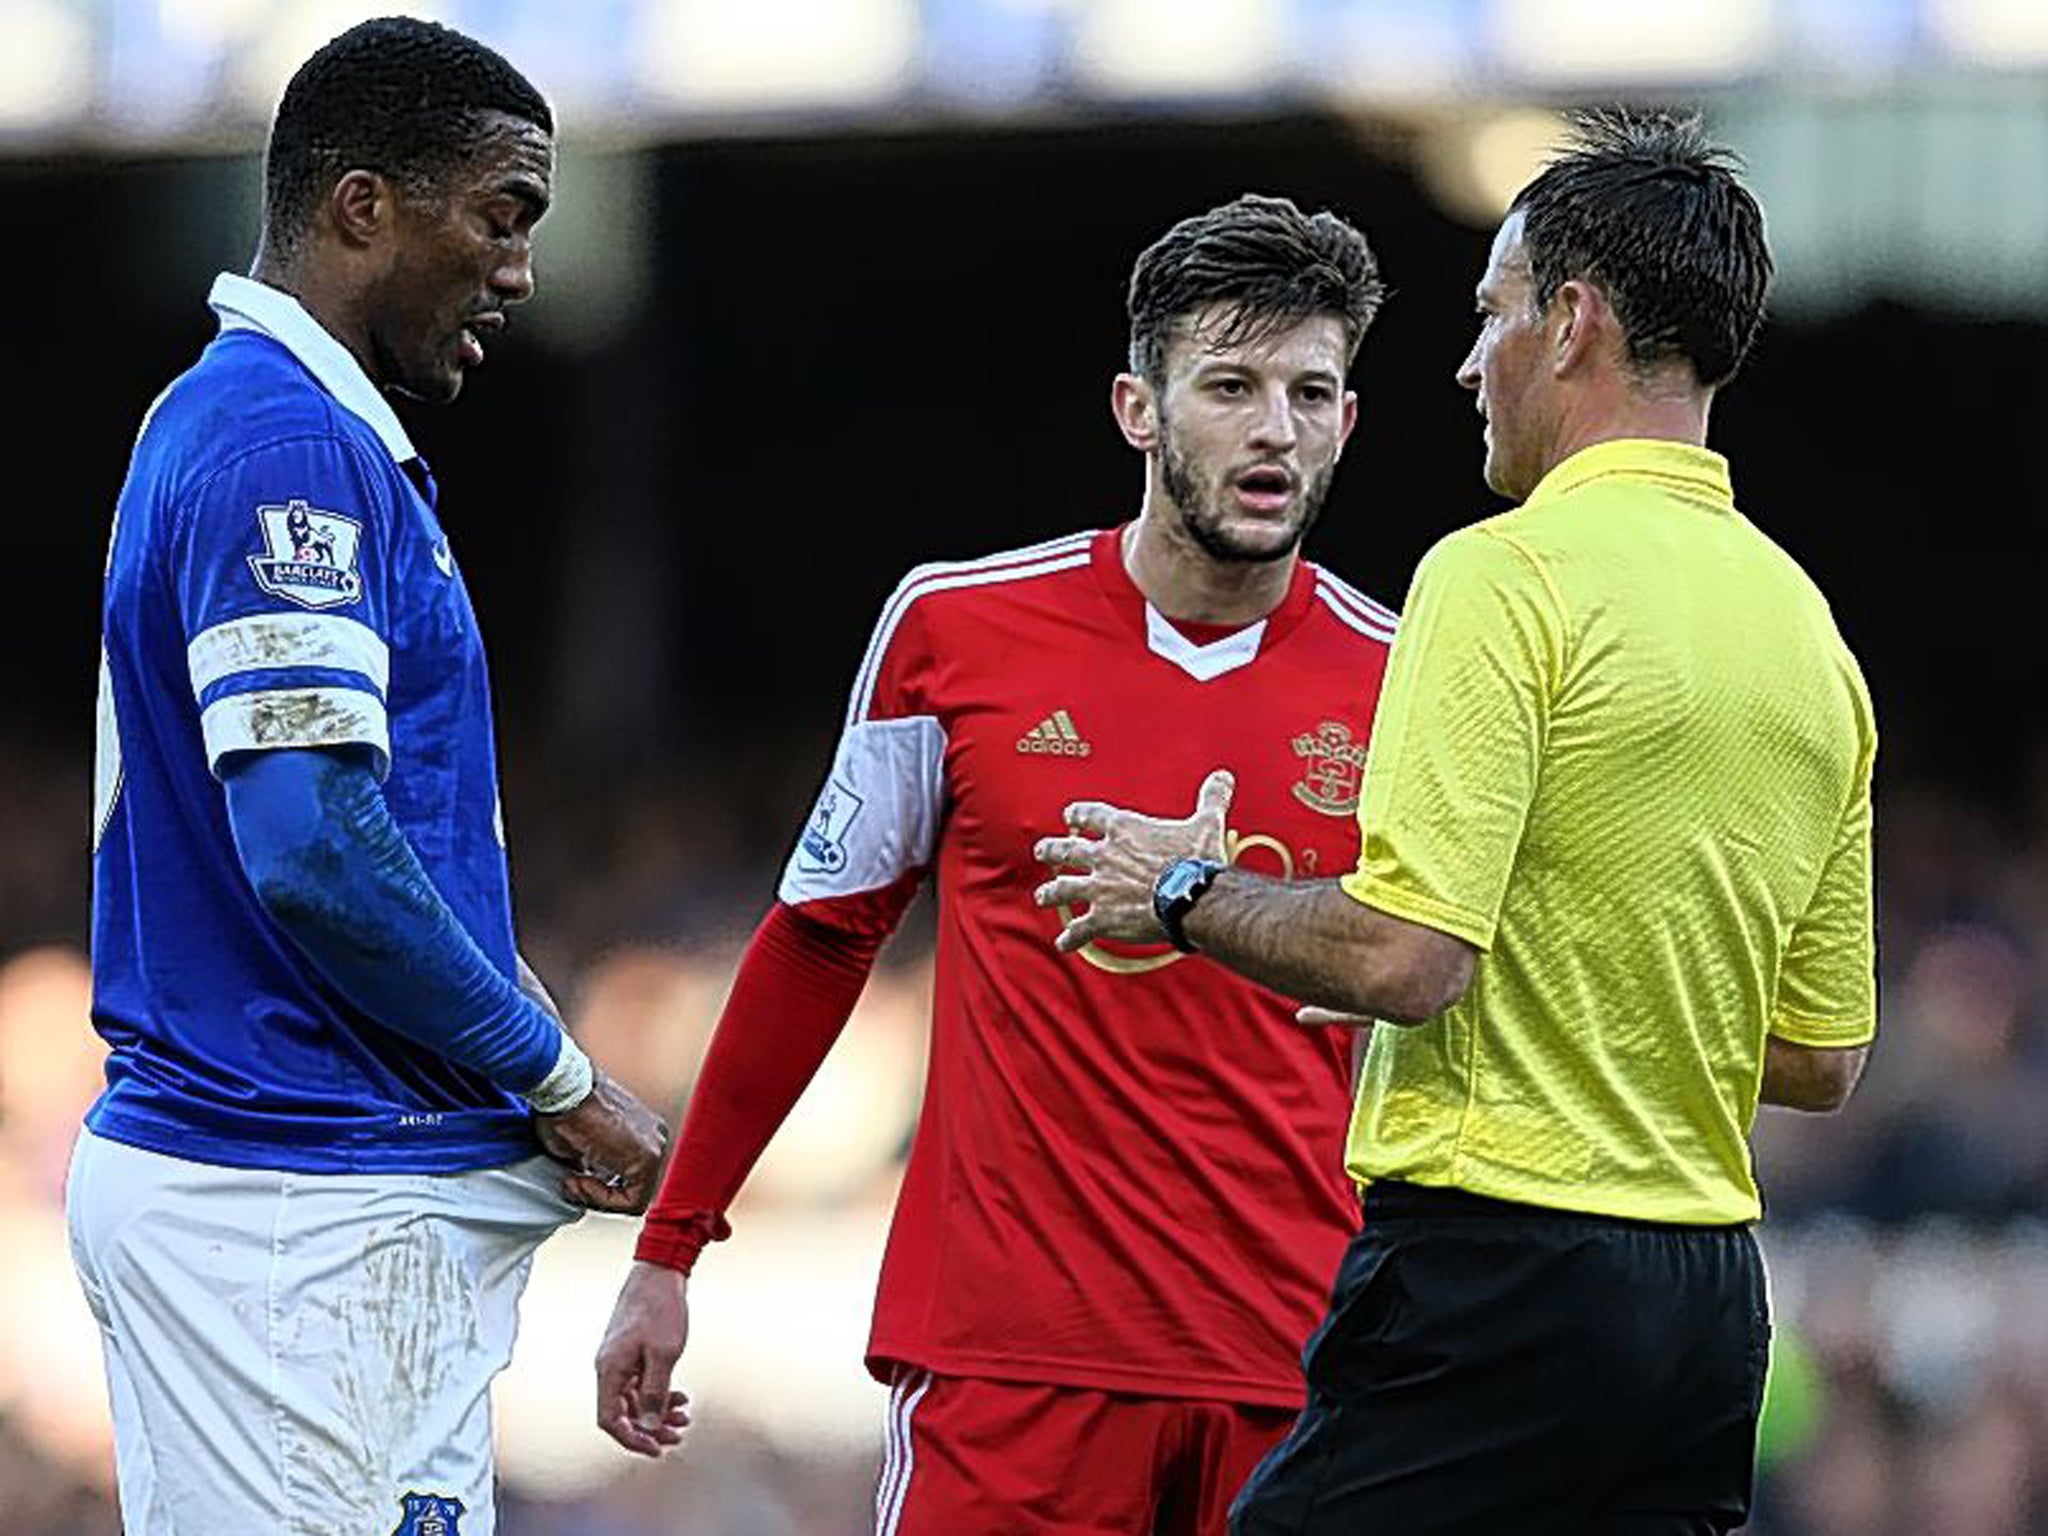 No Saints: Southampton were ‘furious’ at Mark Clattenburg’s alleged remark to Adam Lallana, but the scourge of players abusing referees is trivialised